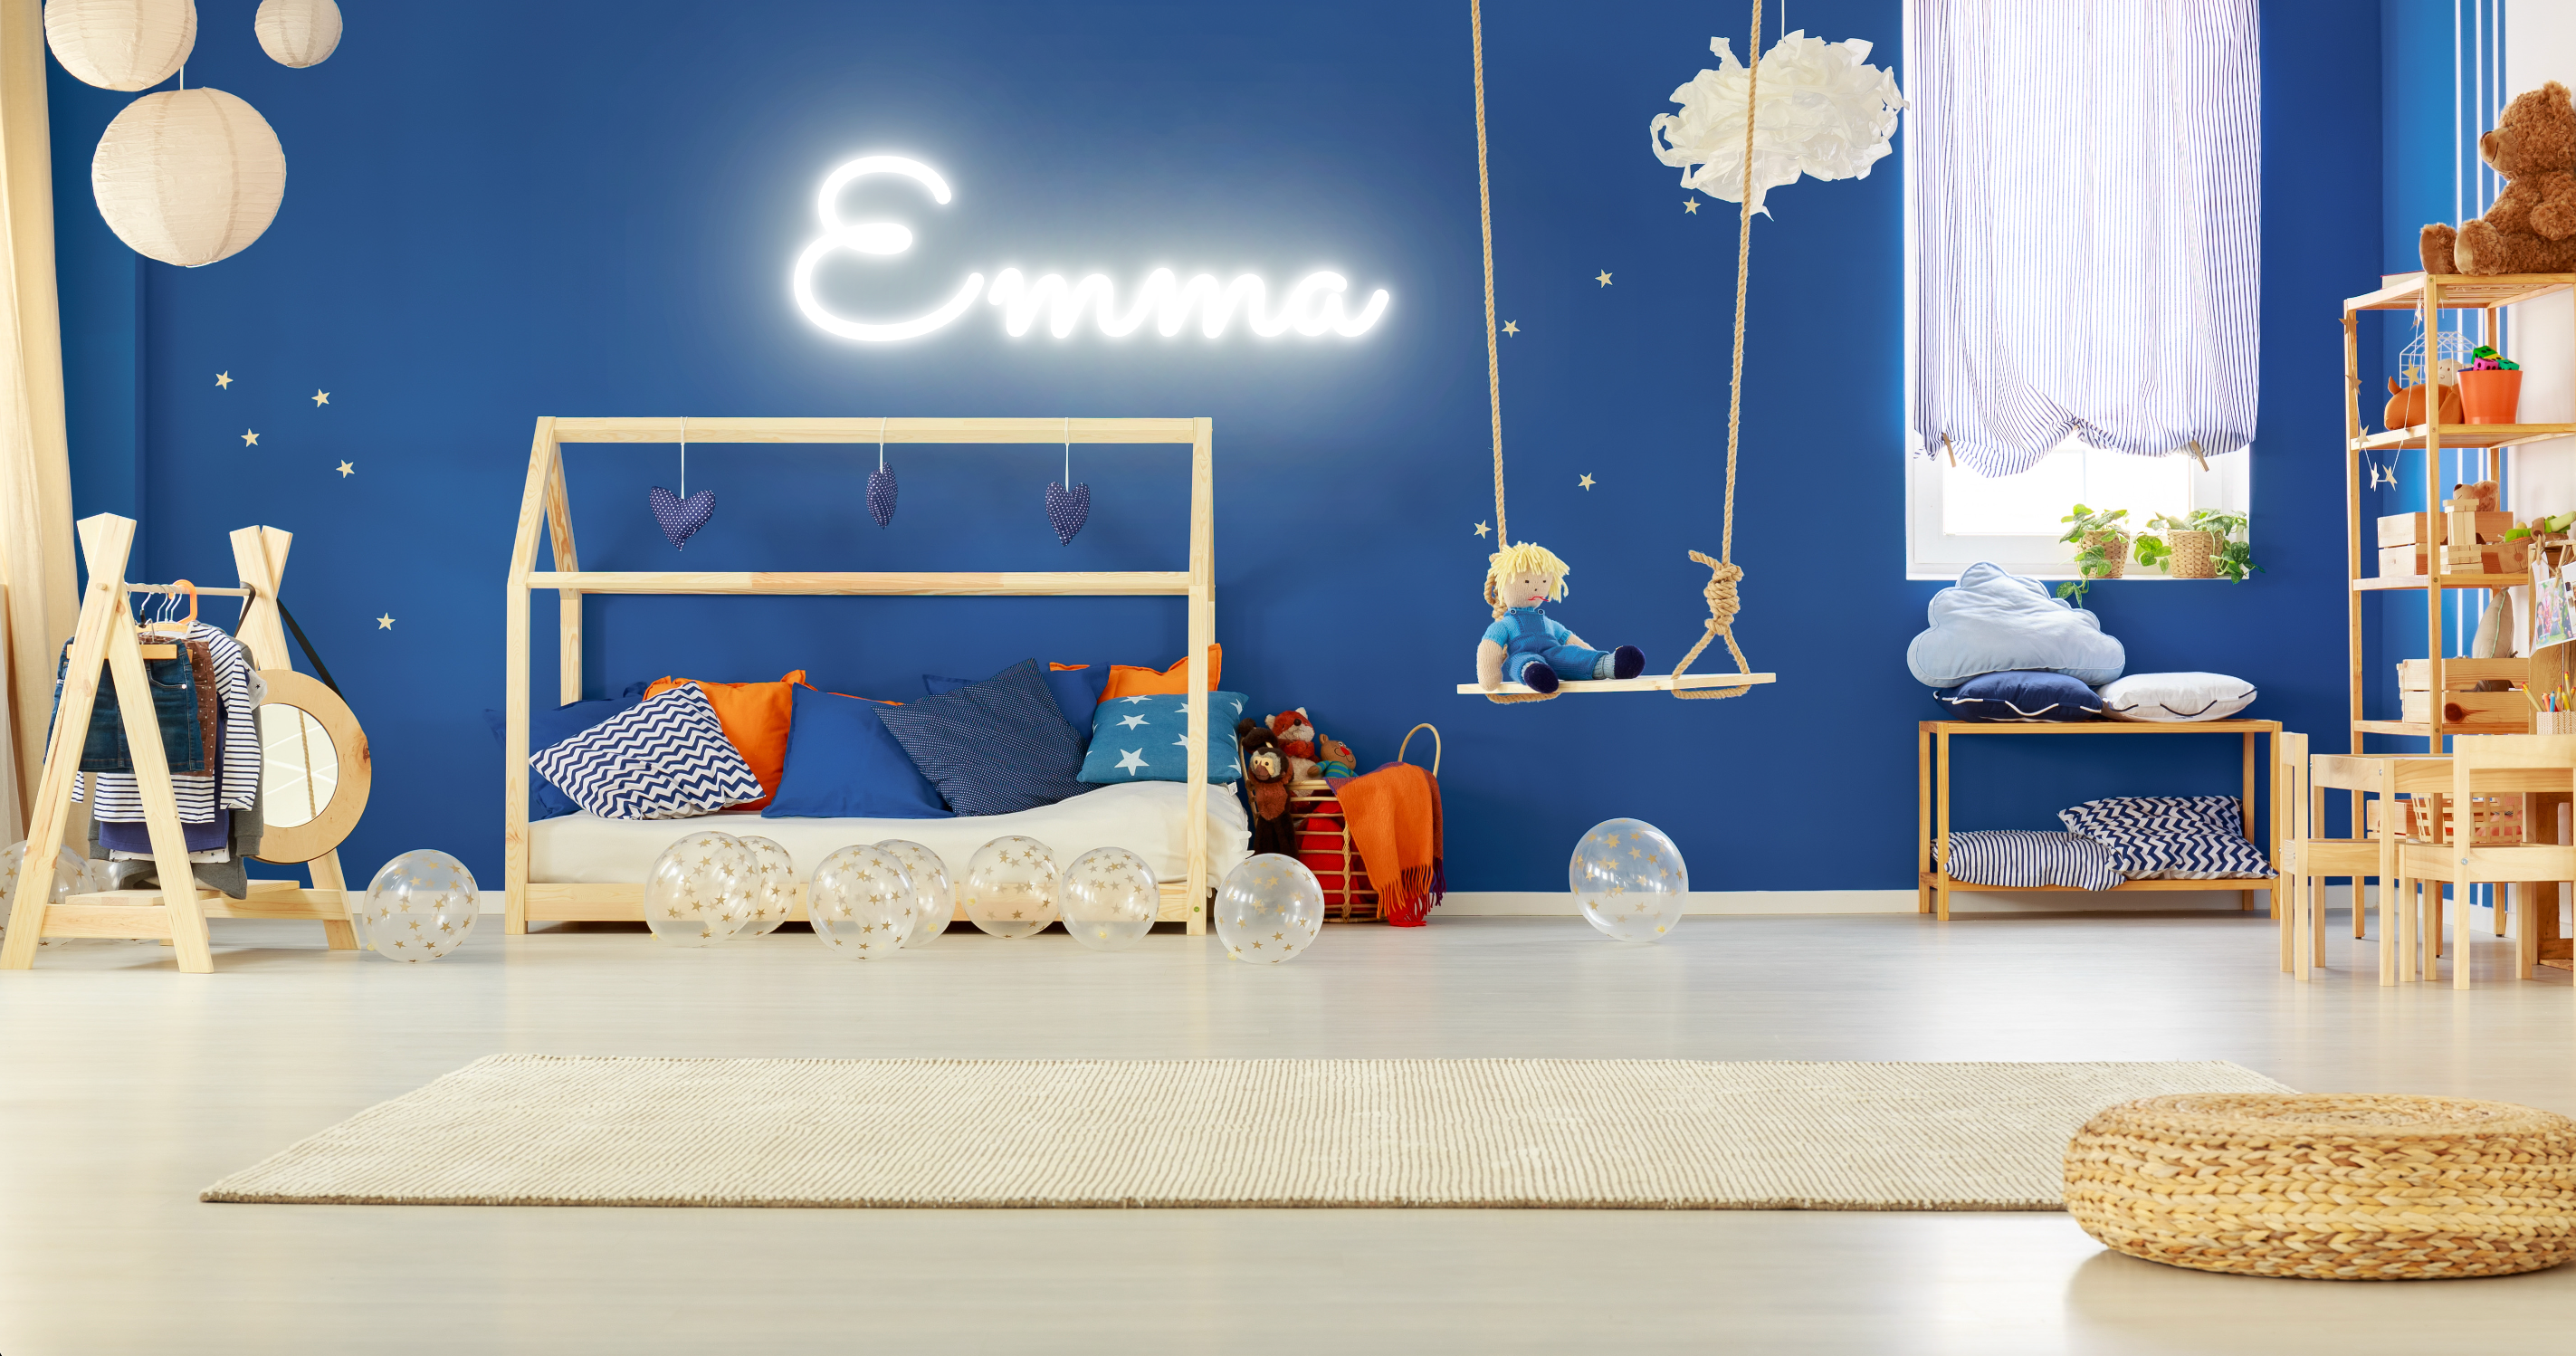 "Emma" Baby Name LED Neon Sign